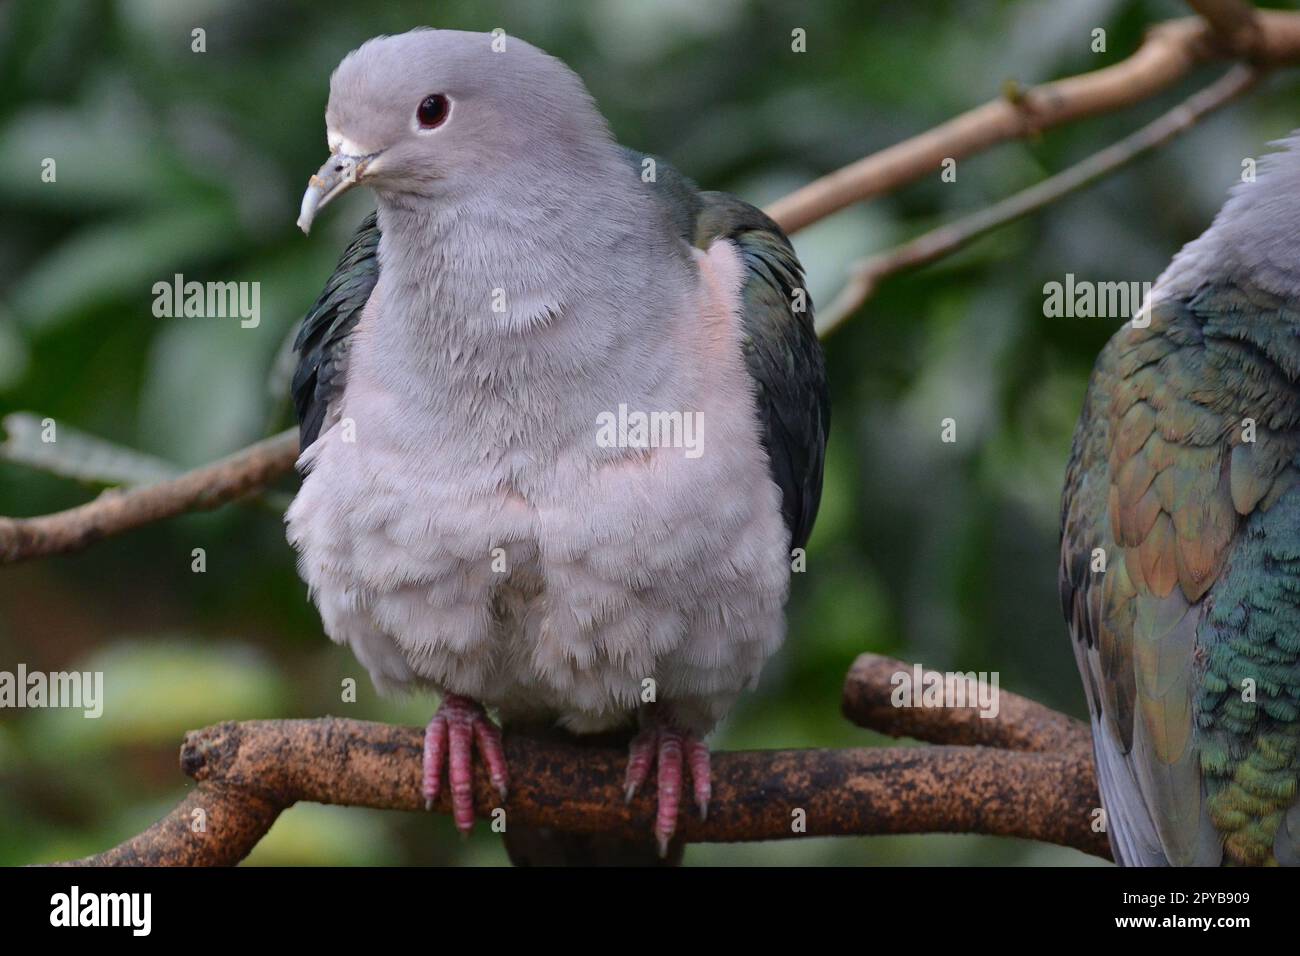 Close-up of a green imperial pigeon, Hong Kong Park Stock Photo